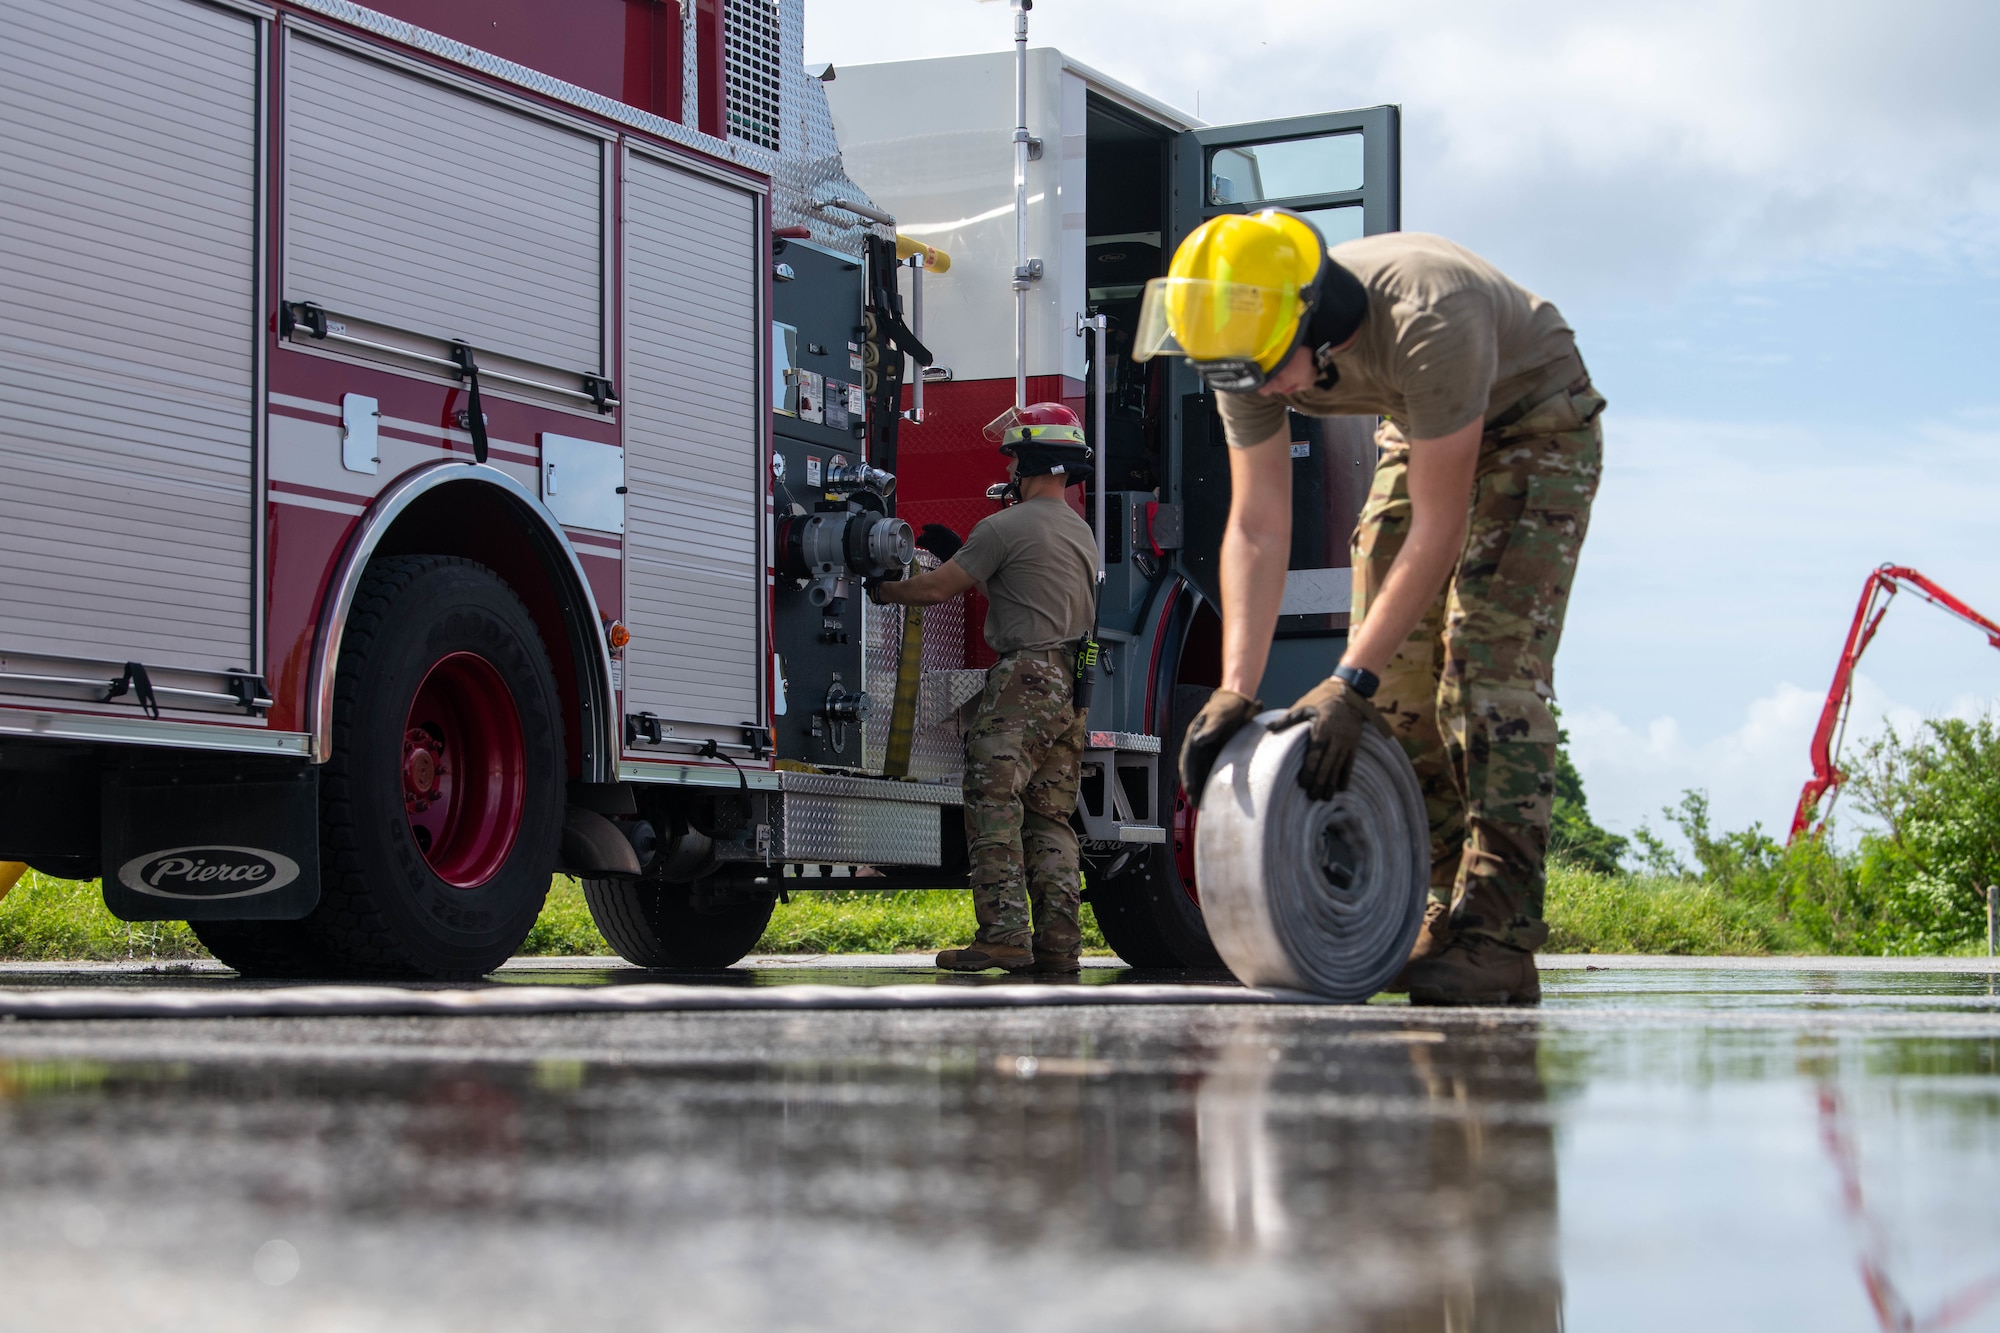 18th CES Firemen conduct a clean up after a structure fire exercise